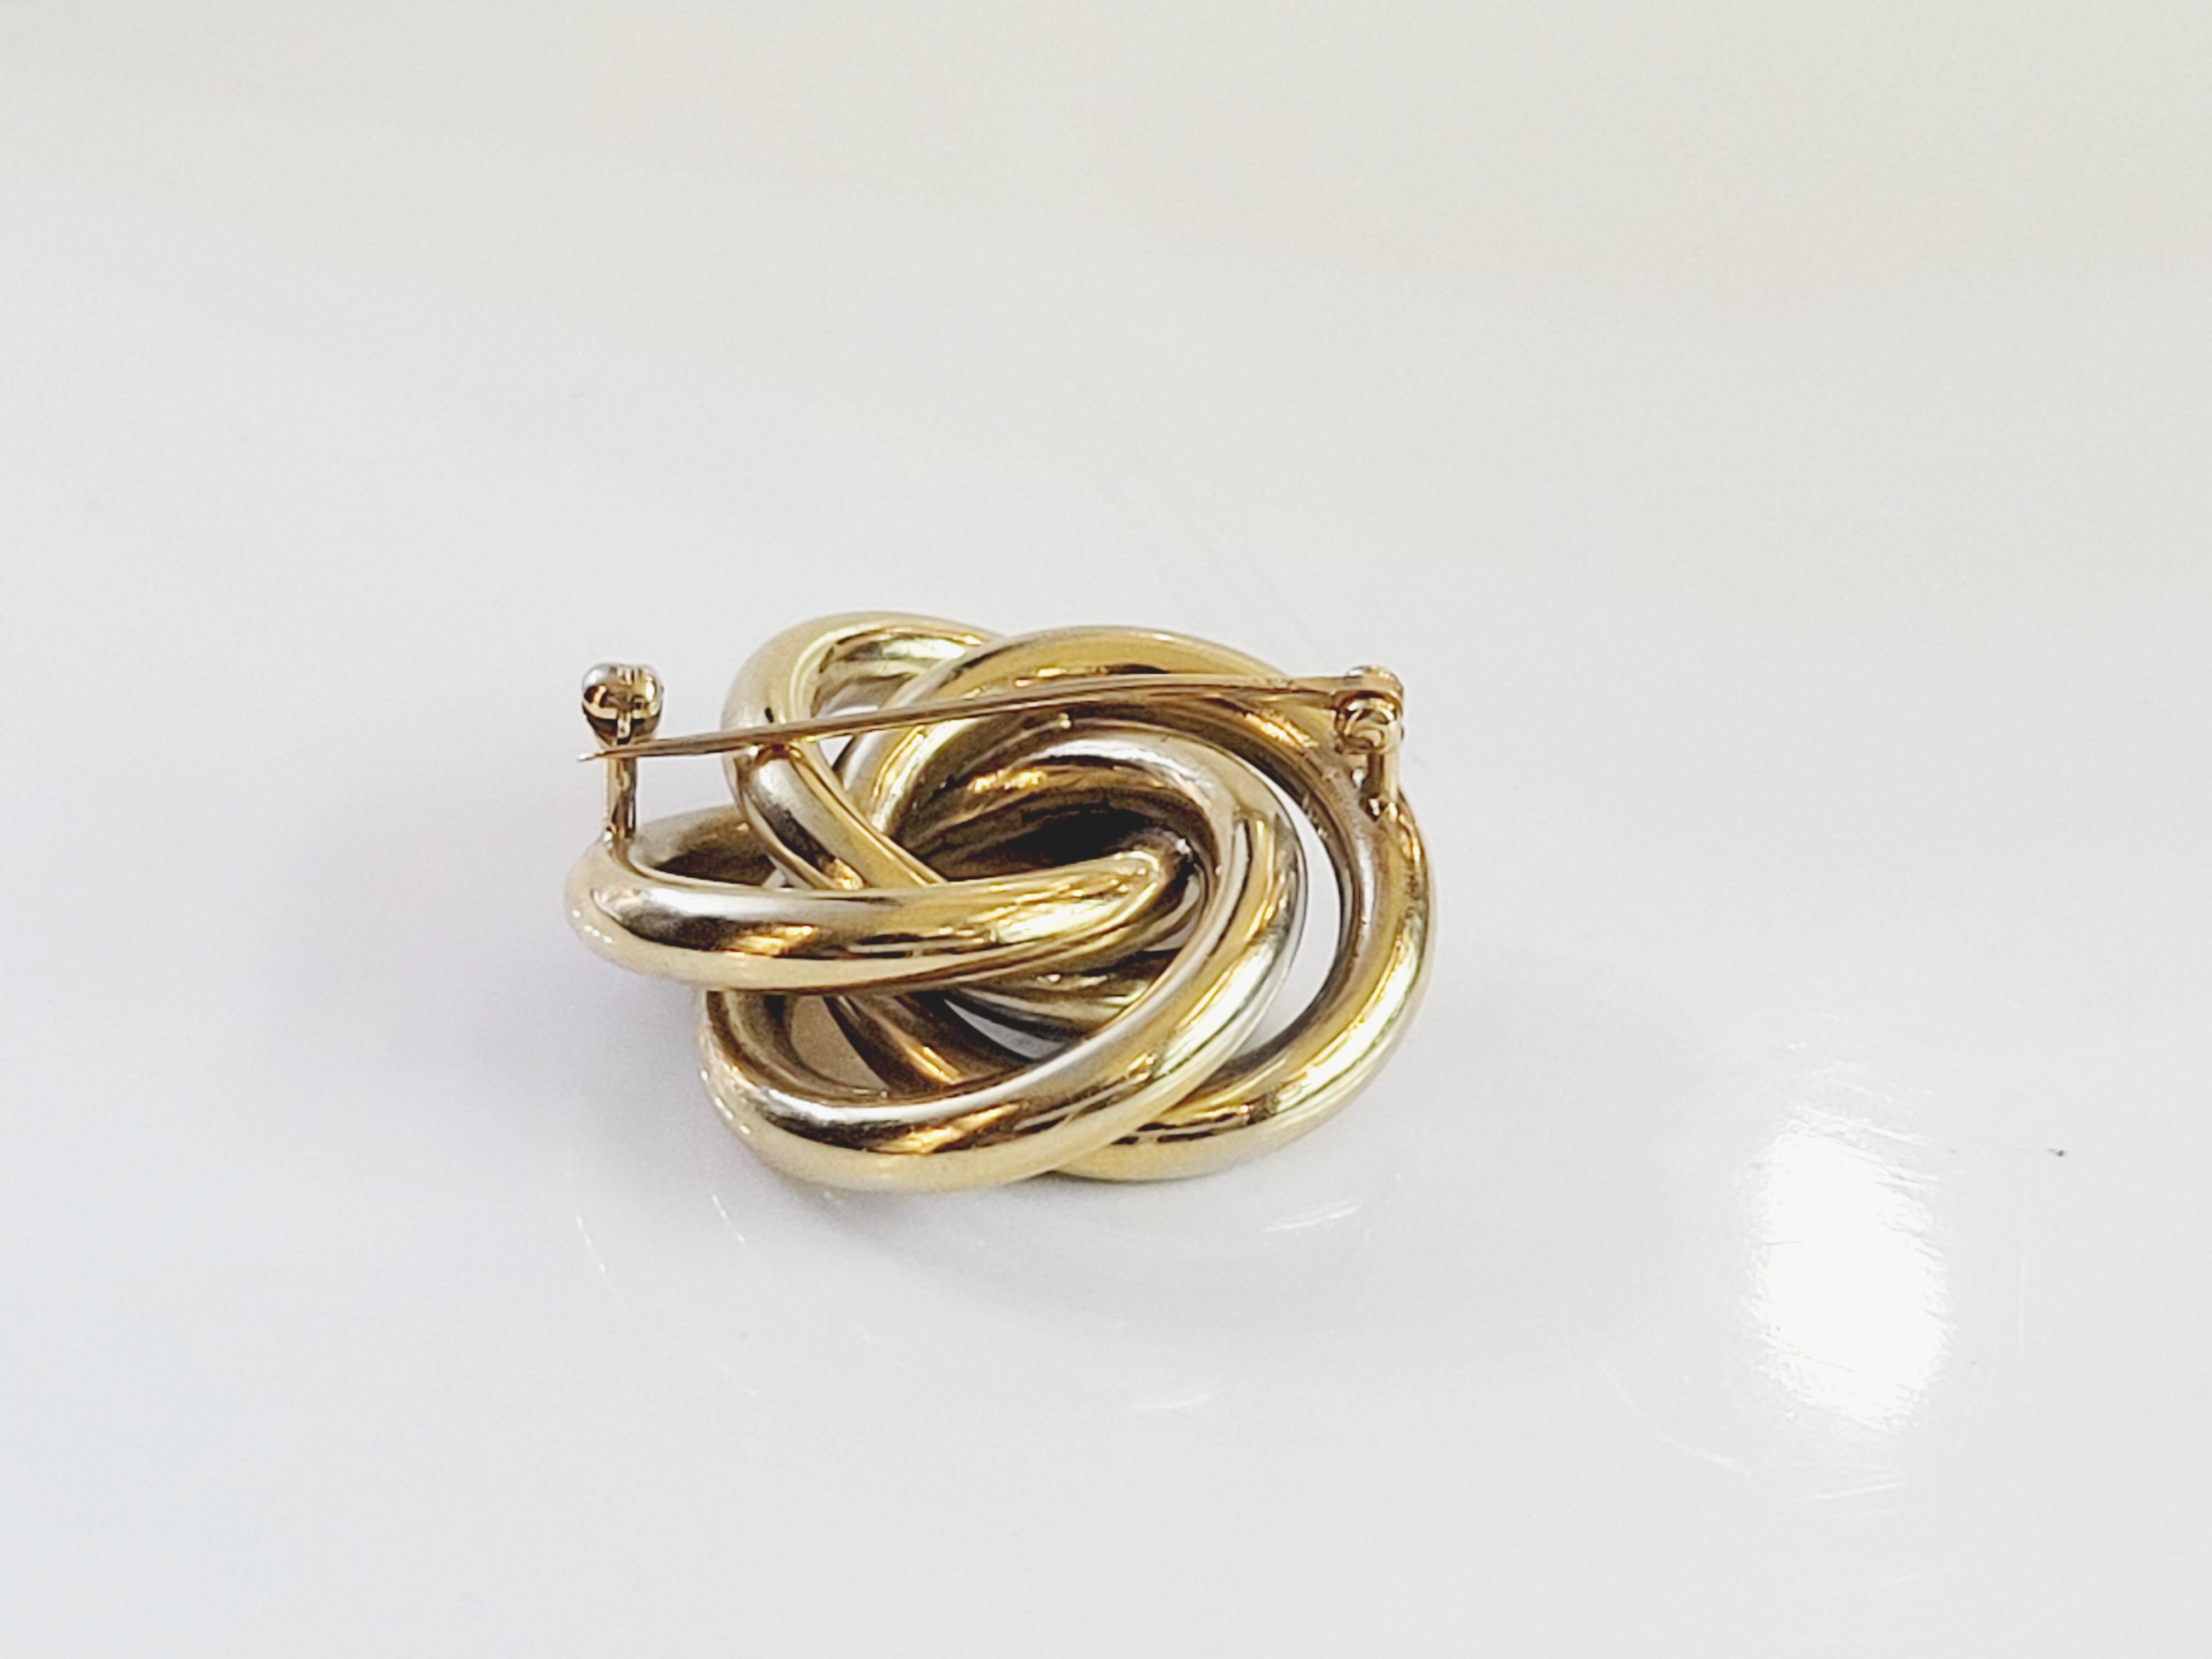 Brand Unbranded 

Type Brooch

Mint condition

14K Rose gold

Dimension 34mm

Width 4mm

Weight 15gr